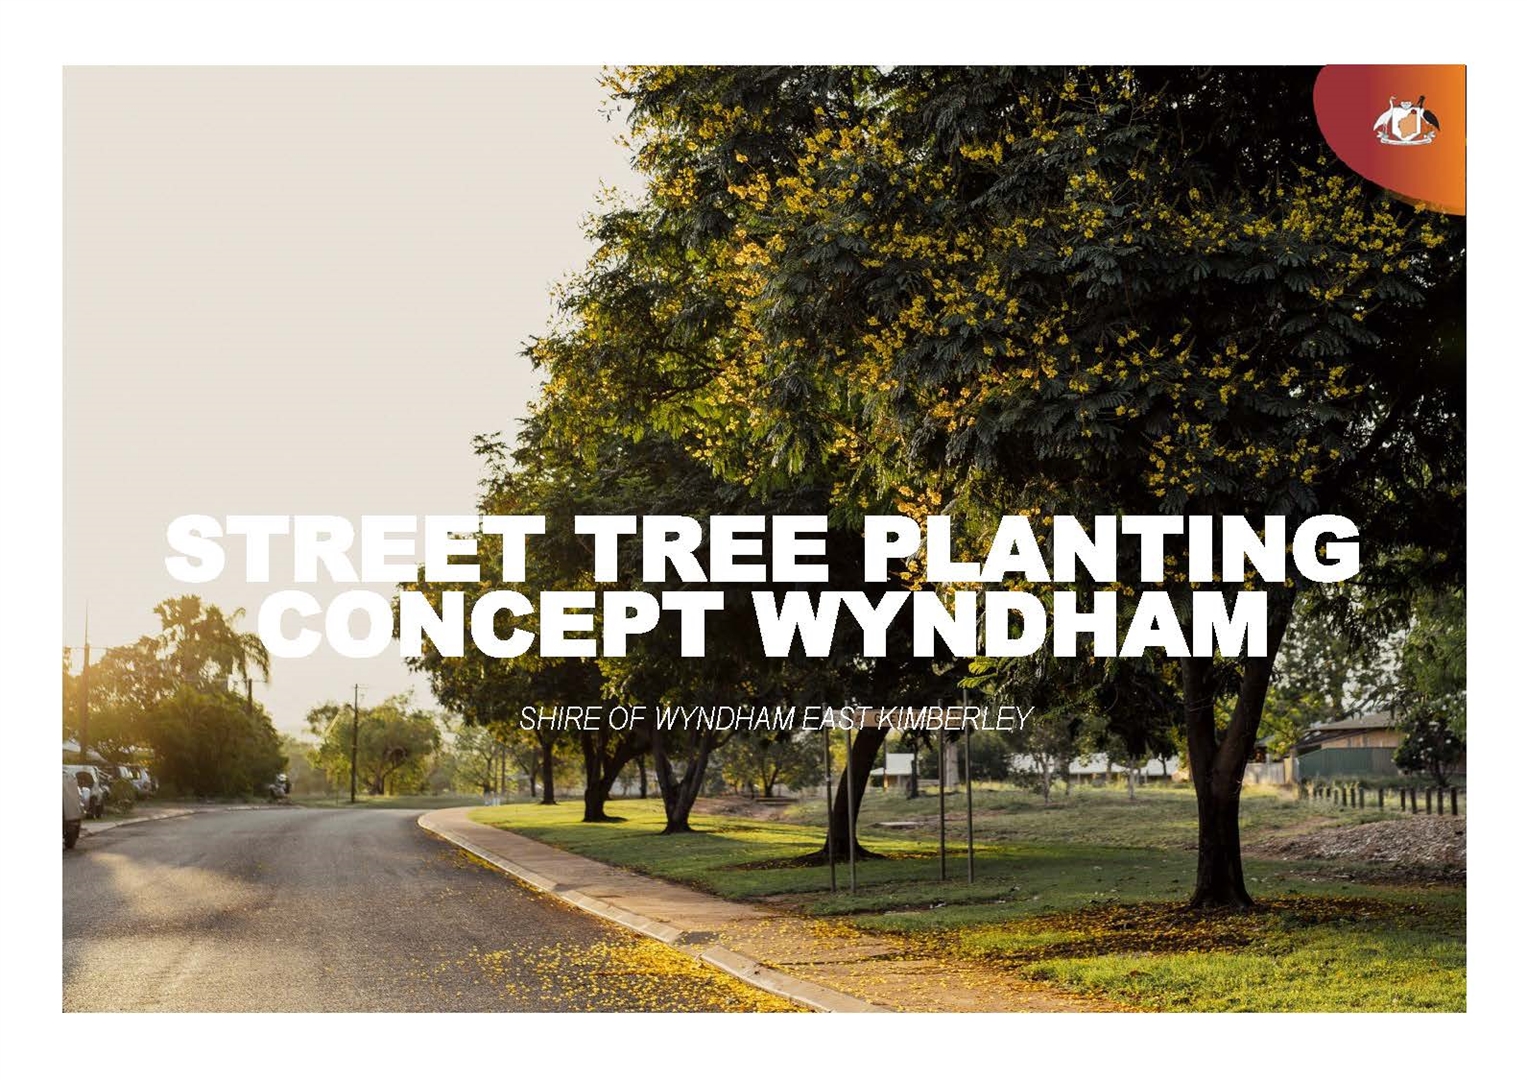 Preliminary Plan for Tree Planting in Wyndham